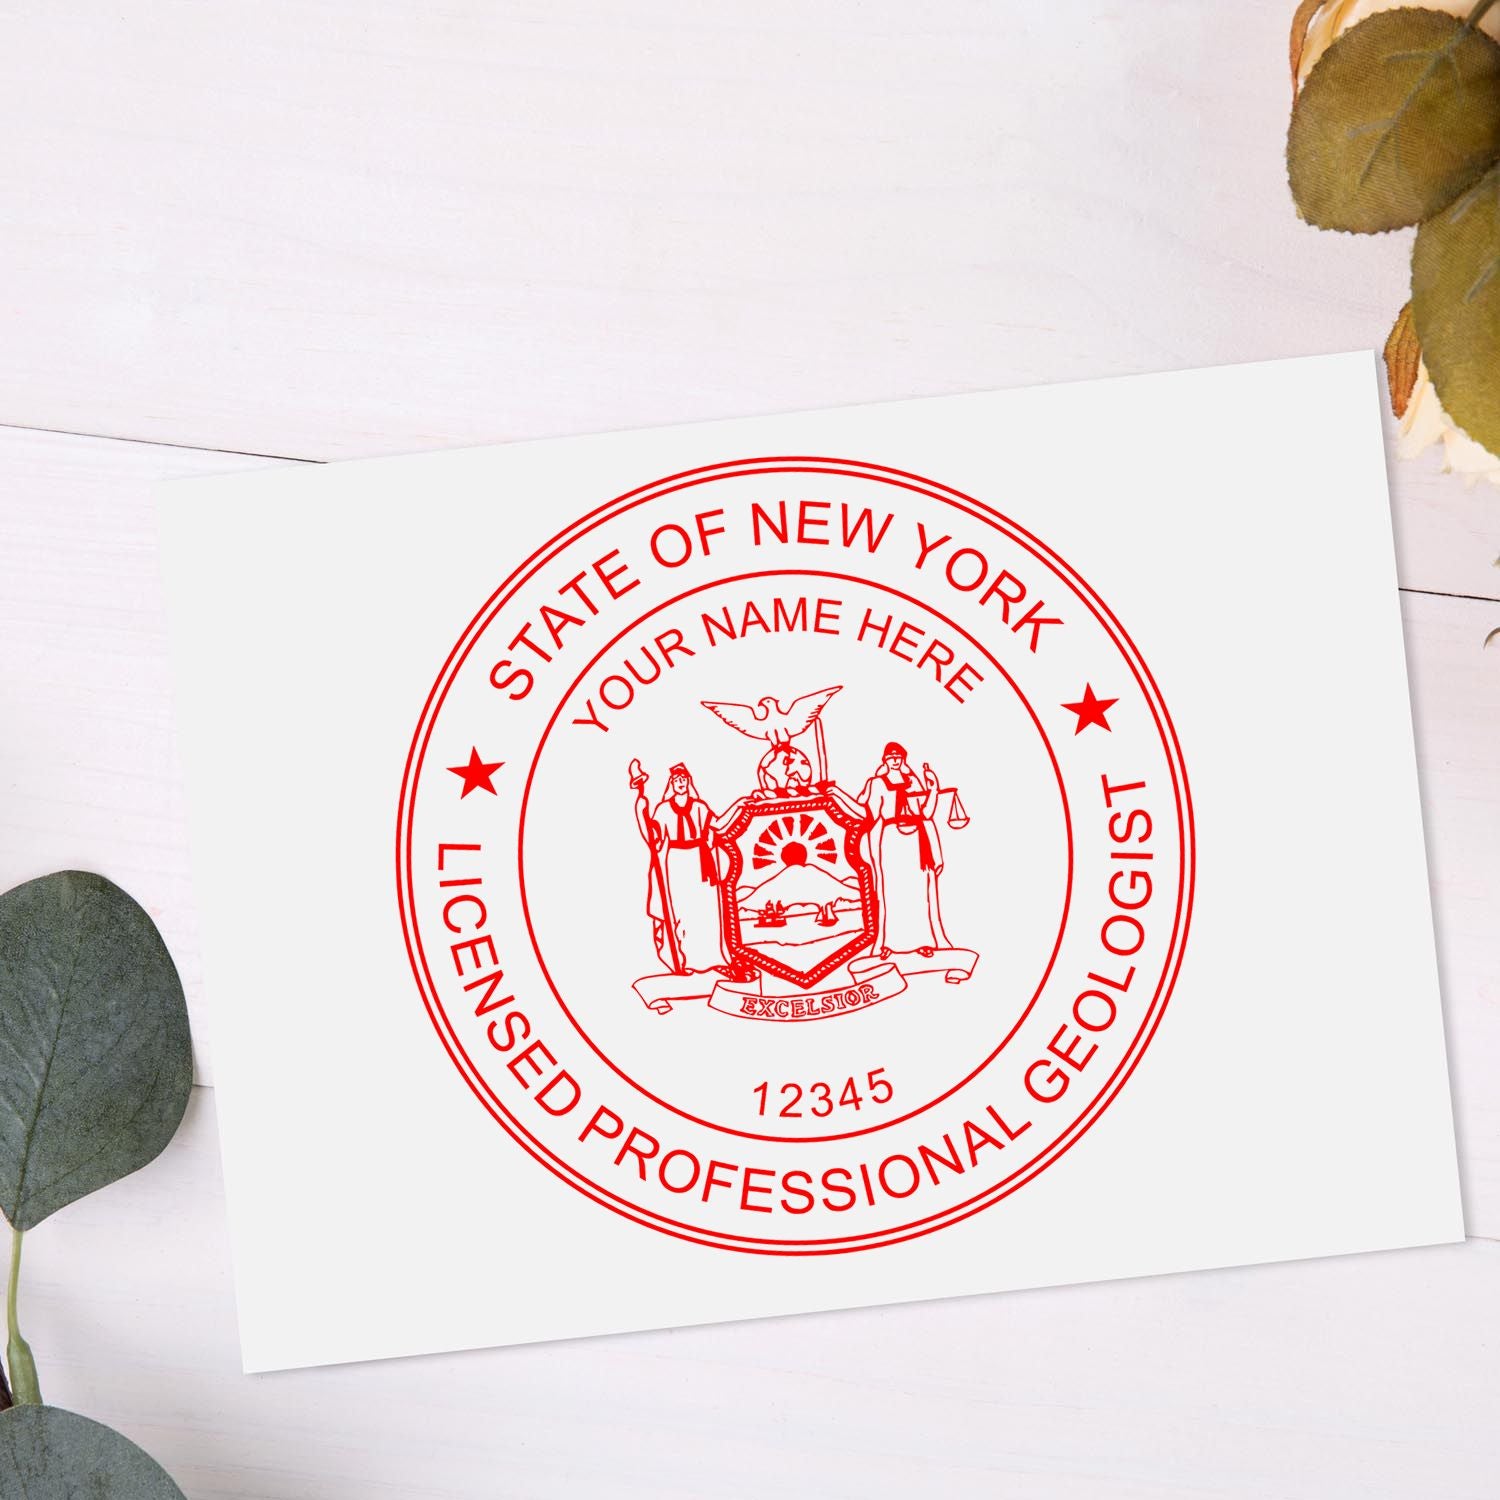 The main image for the New York Professional Geologist Seal Stamp depicting a sample of the imprint and imprint sample